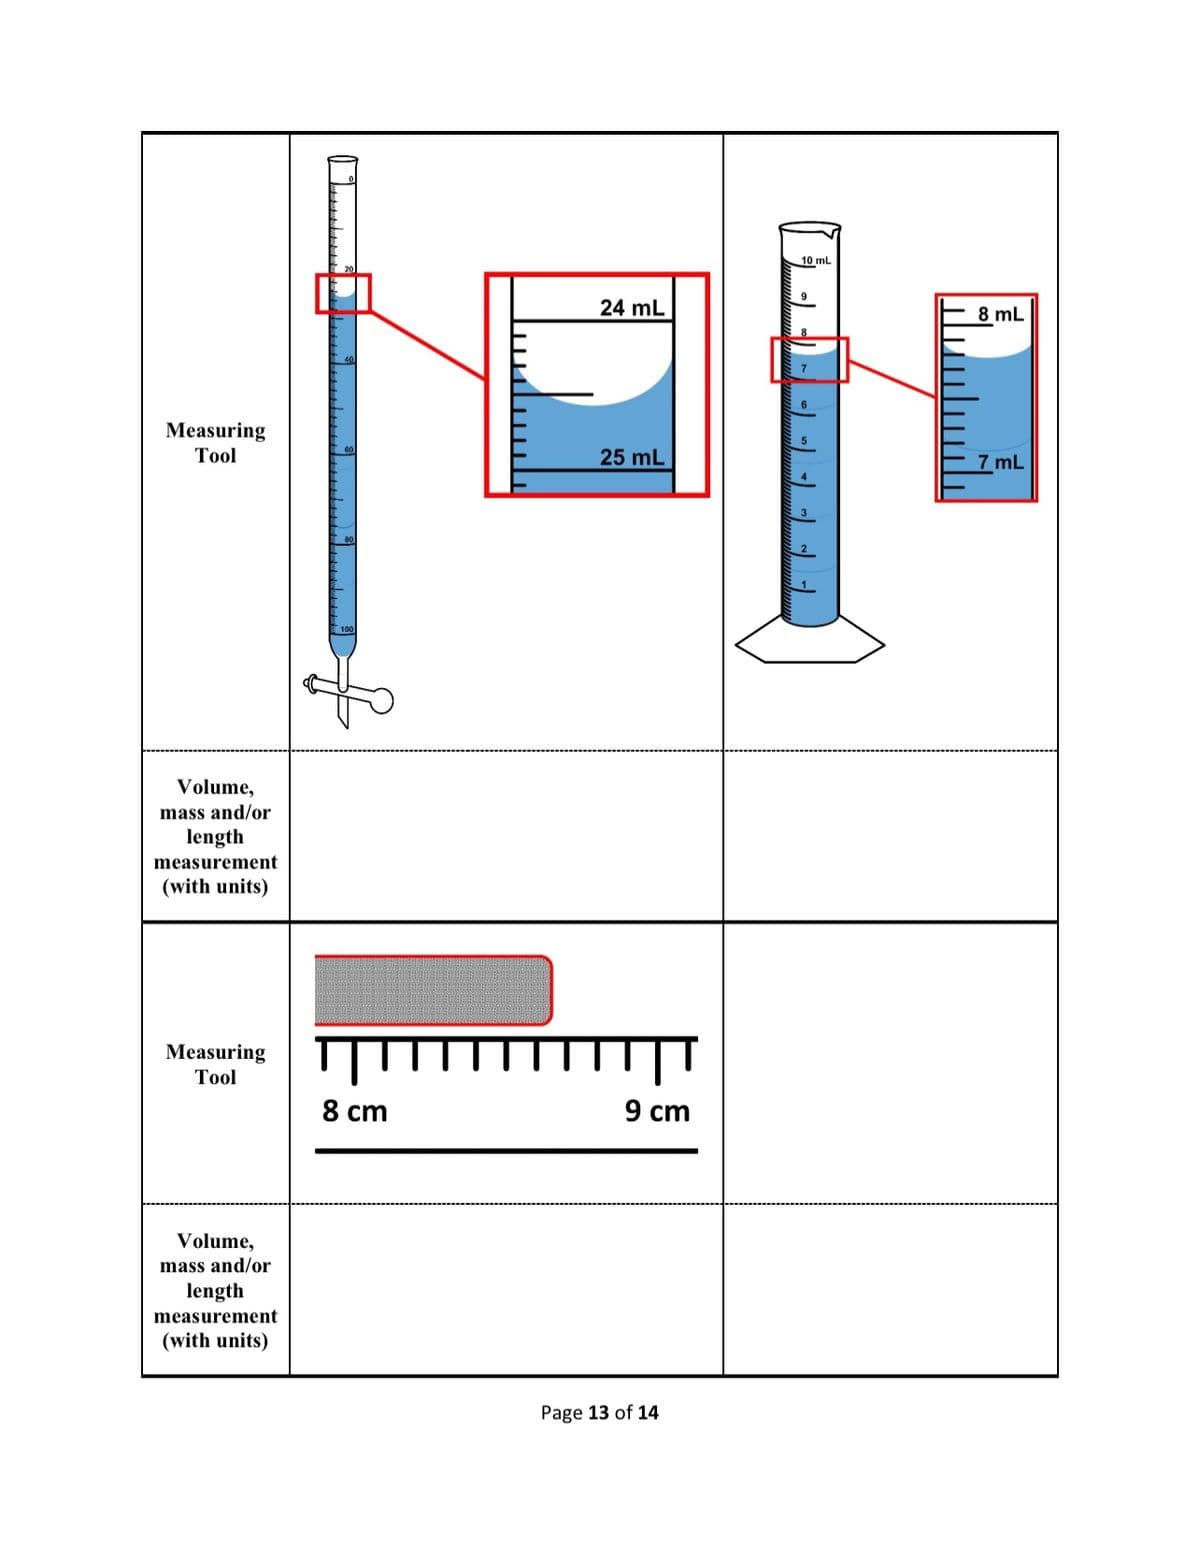 10 mL
9
24 mL
8 mL
7
Measuring
Тool
25 mL
7 mL
Volume,
mass and/or
length
measurement
(with units)
Measuring
Тol
8 cm
9 cm
Volume,
mass and/or
length
measurement
(with units)
Page 13 of 14
